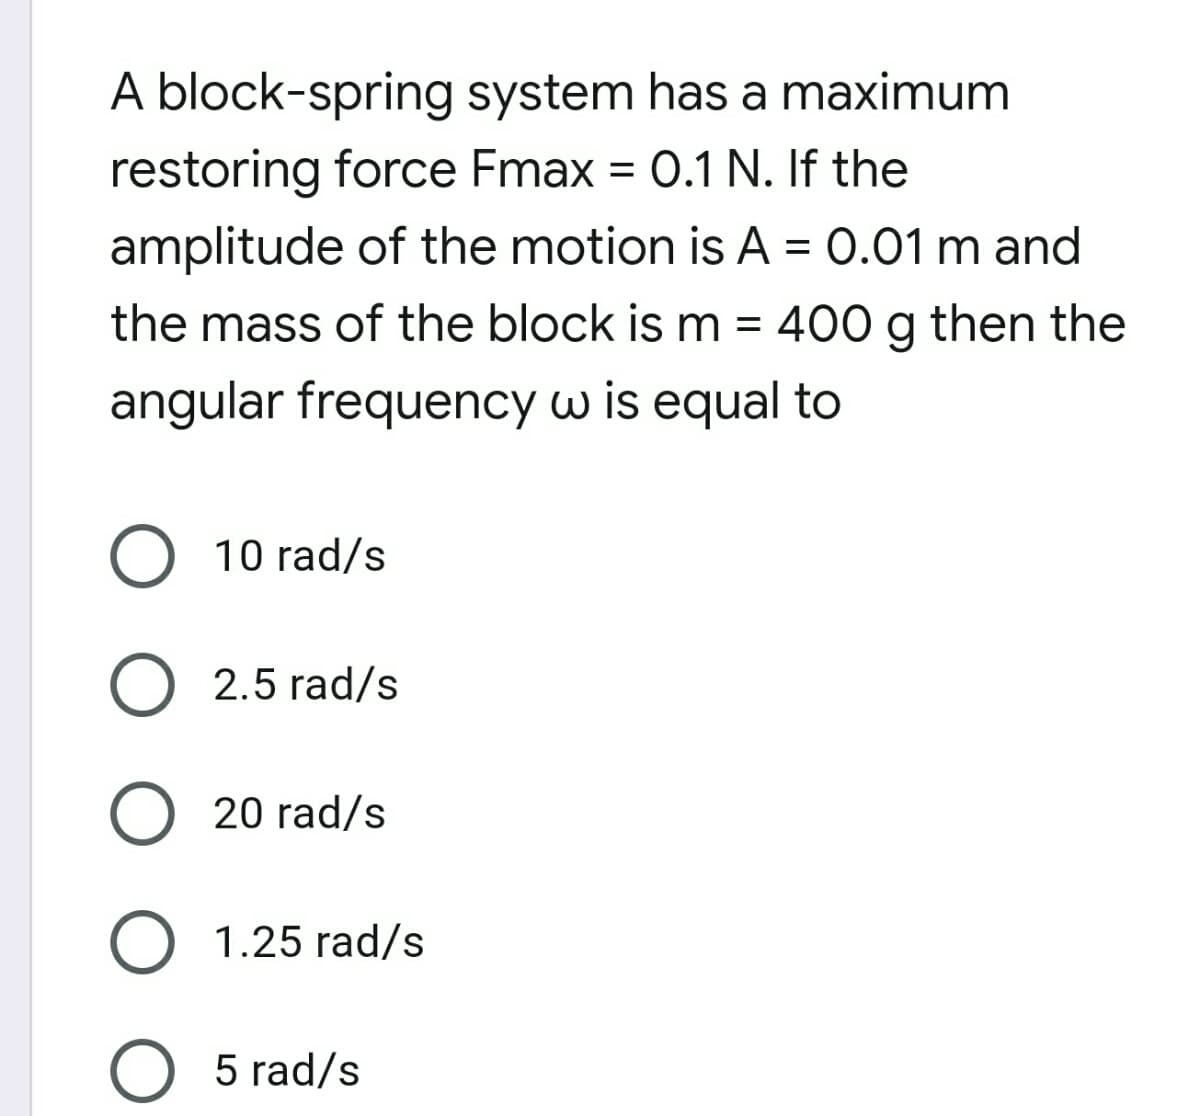 A block-spring system has a maximum
restoring force Fmax = 0.1 N. If the
amplitude of the motion is A = 0.01 m and
the mass of the block is m = 400 g then the
angular frequency w is equal to
10 rad/s
2.5 rad/s
20 rad/s
1.25 rad/s
O 5 rad/s
